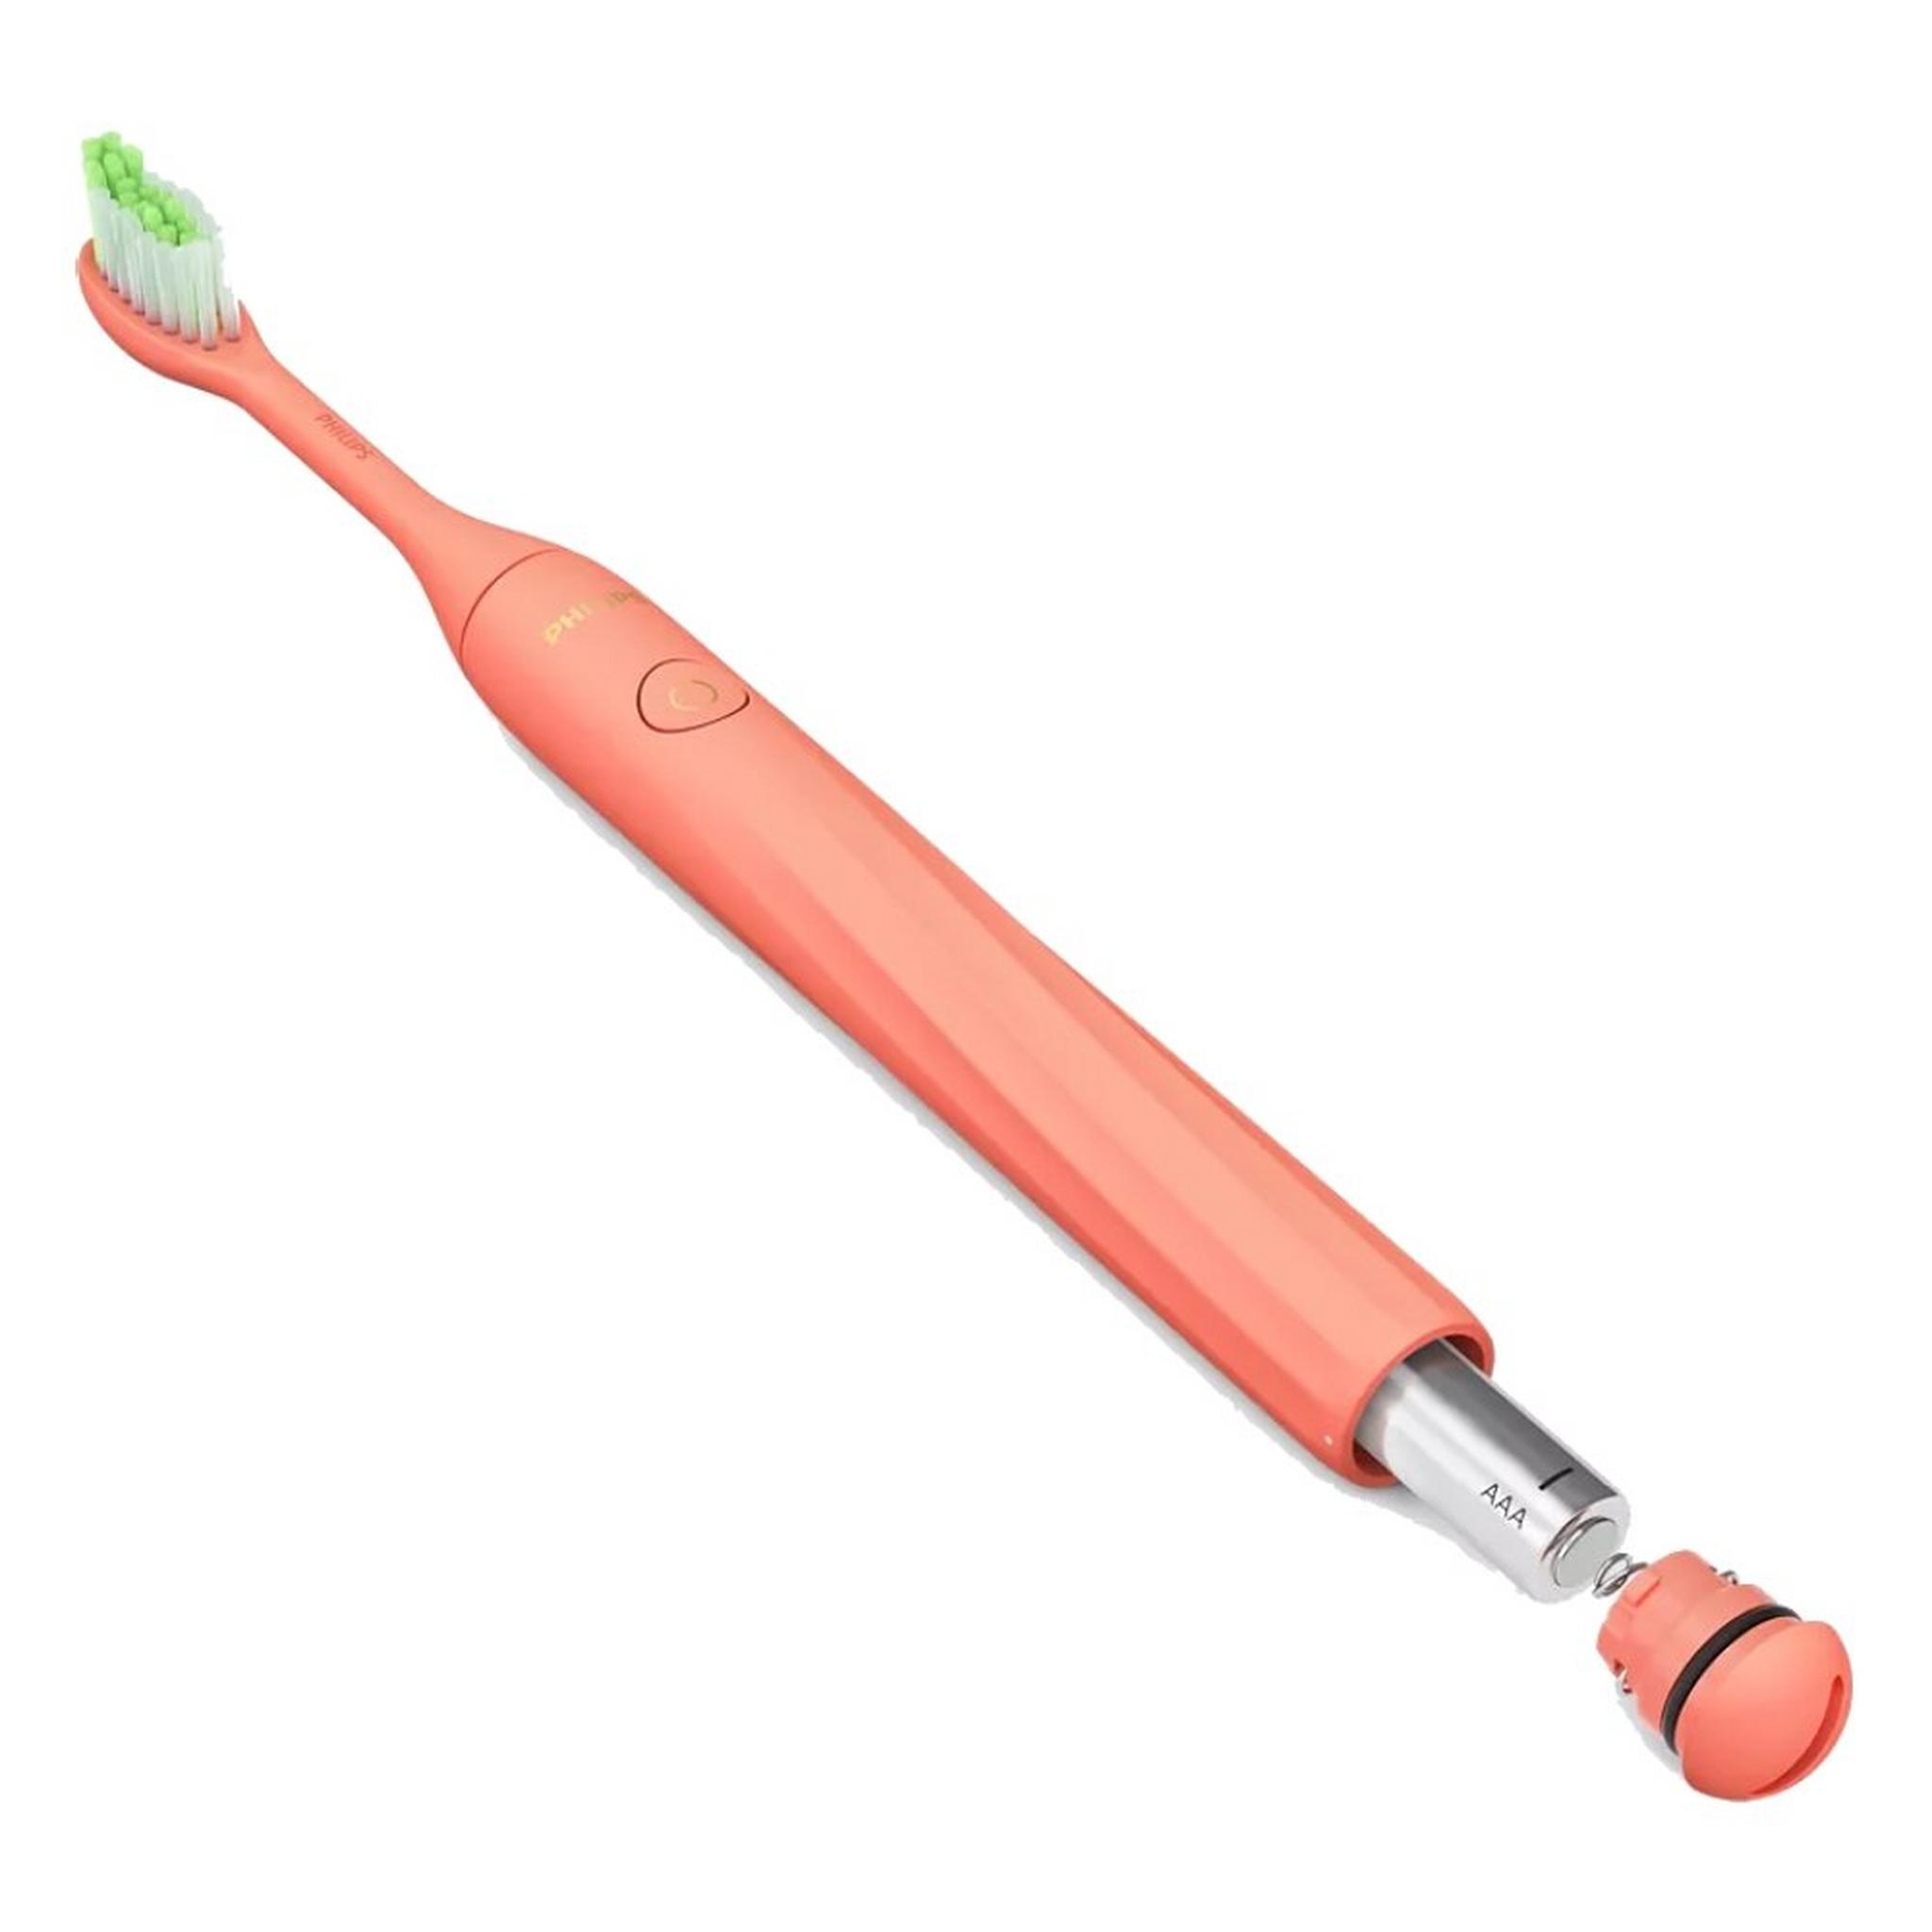 Philips One Battery Toothbrush - Miami Coral